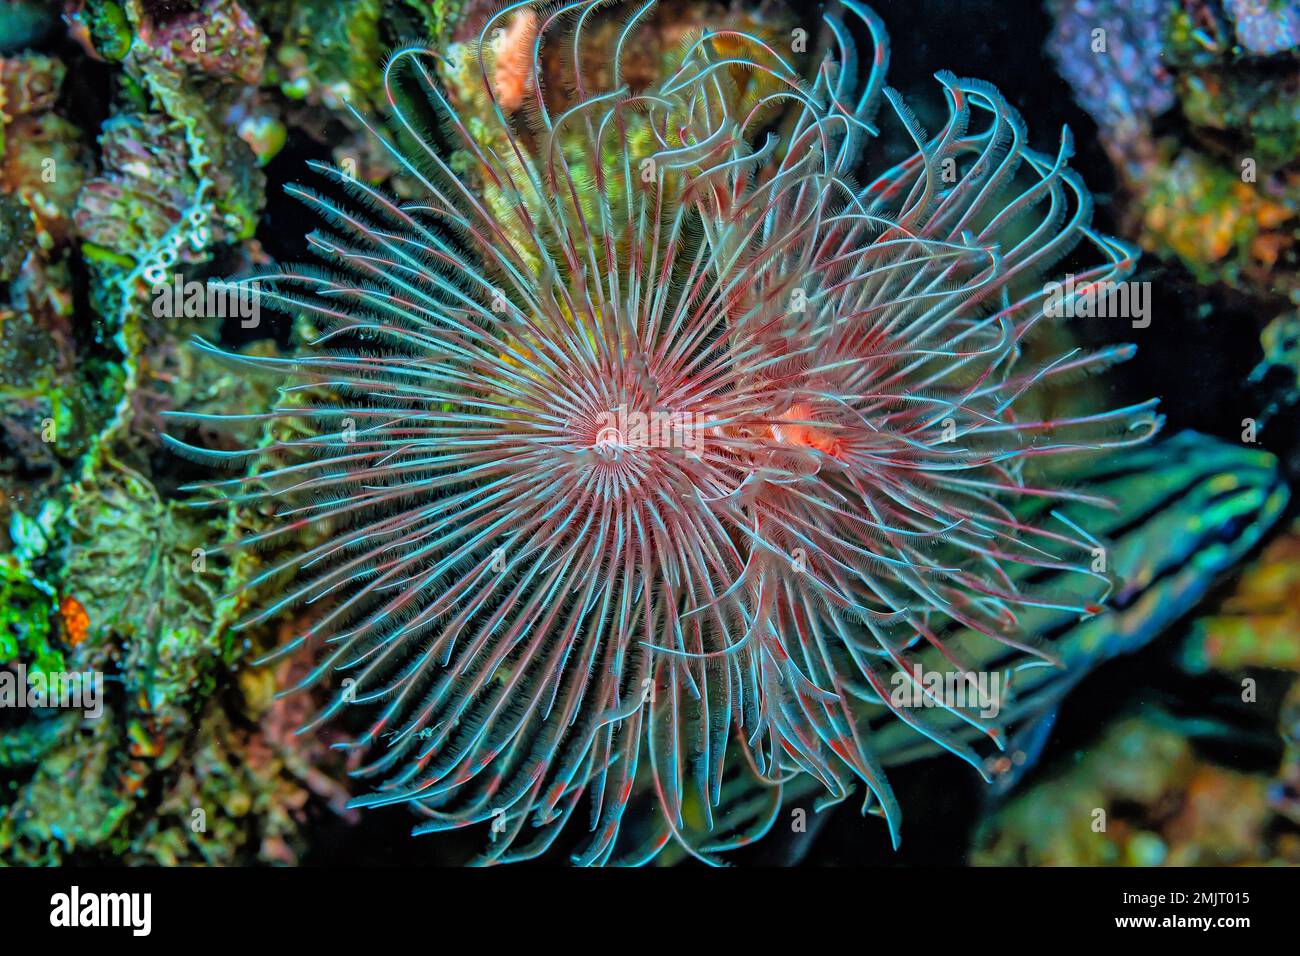 Sabellidae, or feather duster worms, are a family of marine polychaete tube worms characterized by protruding feathery branchiae. Stock Photo